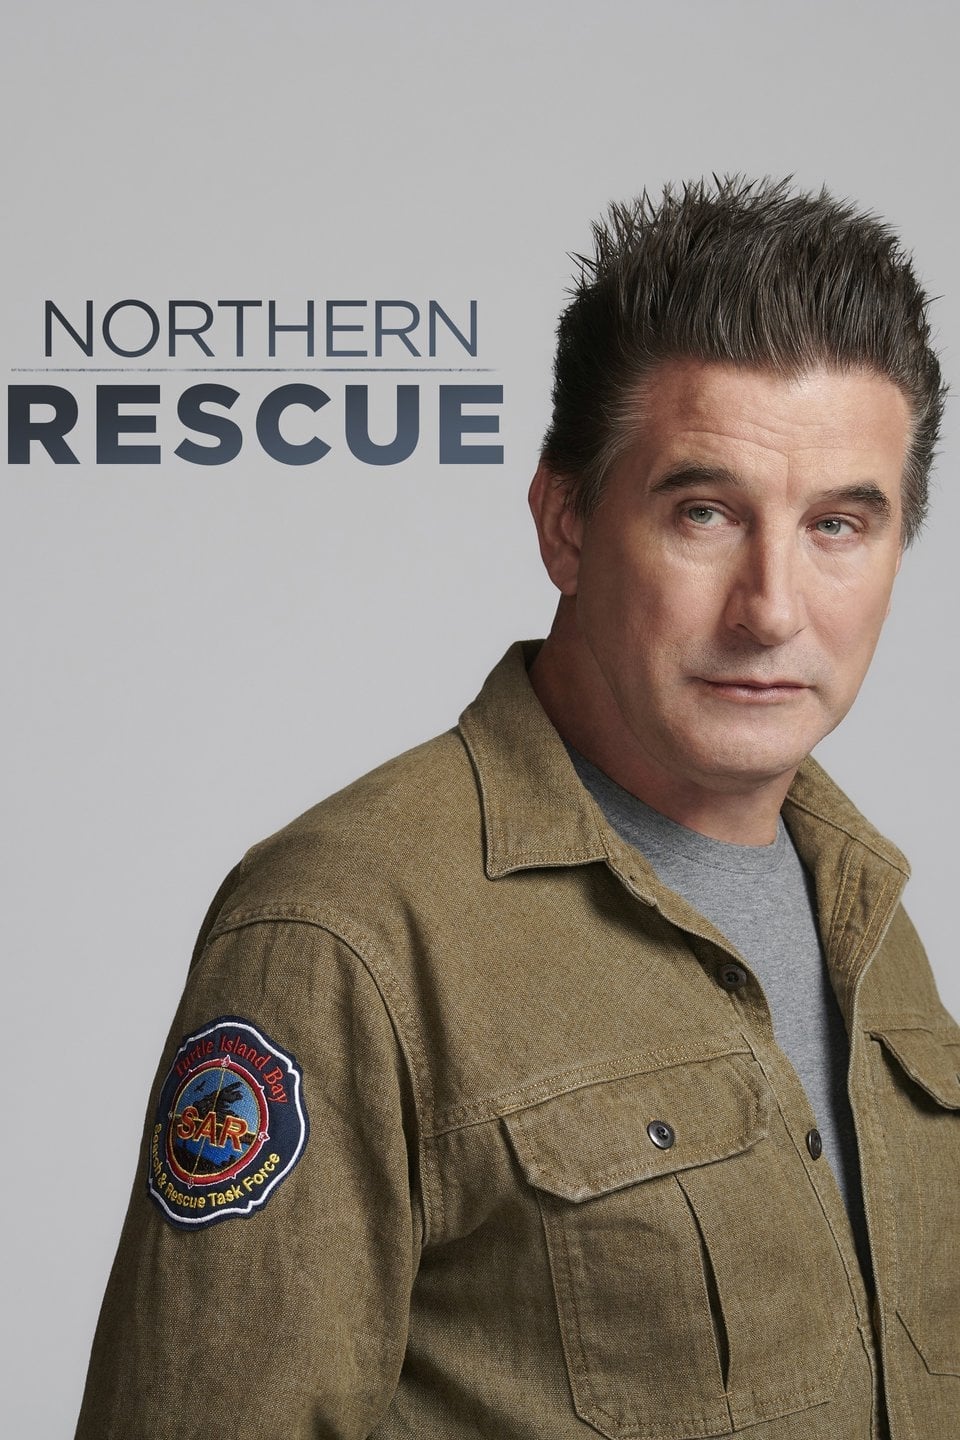 Northern Rescue rating